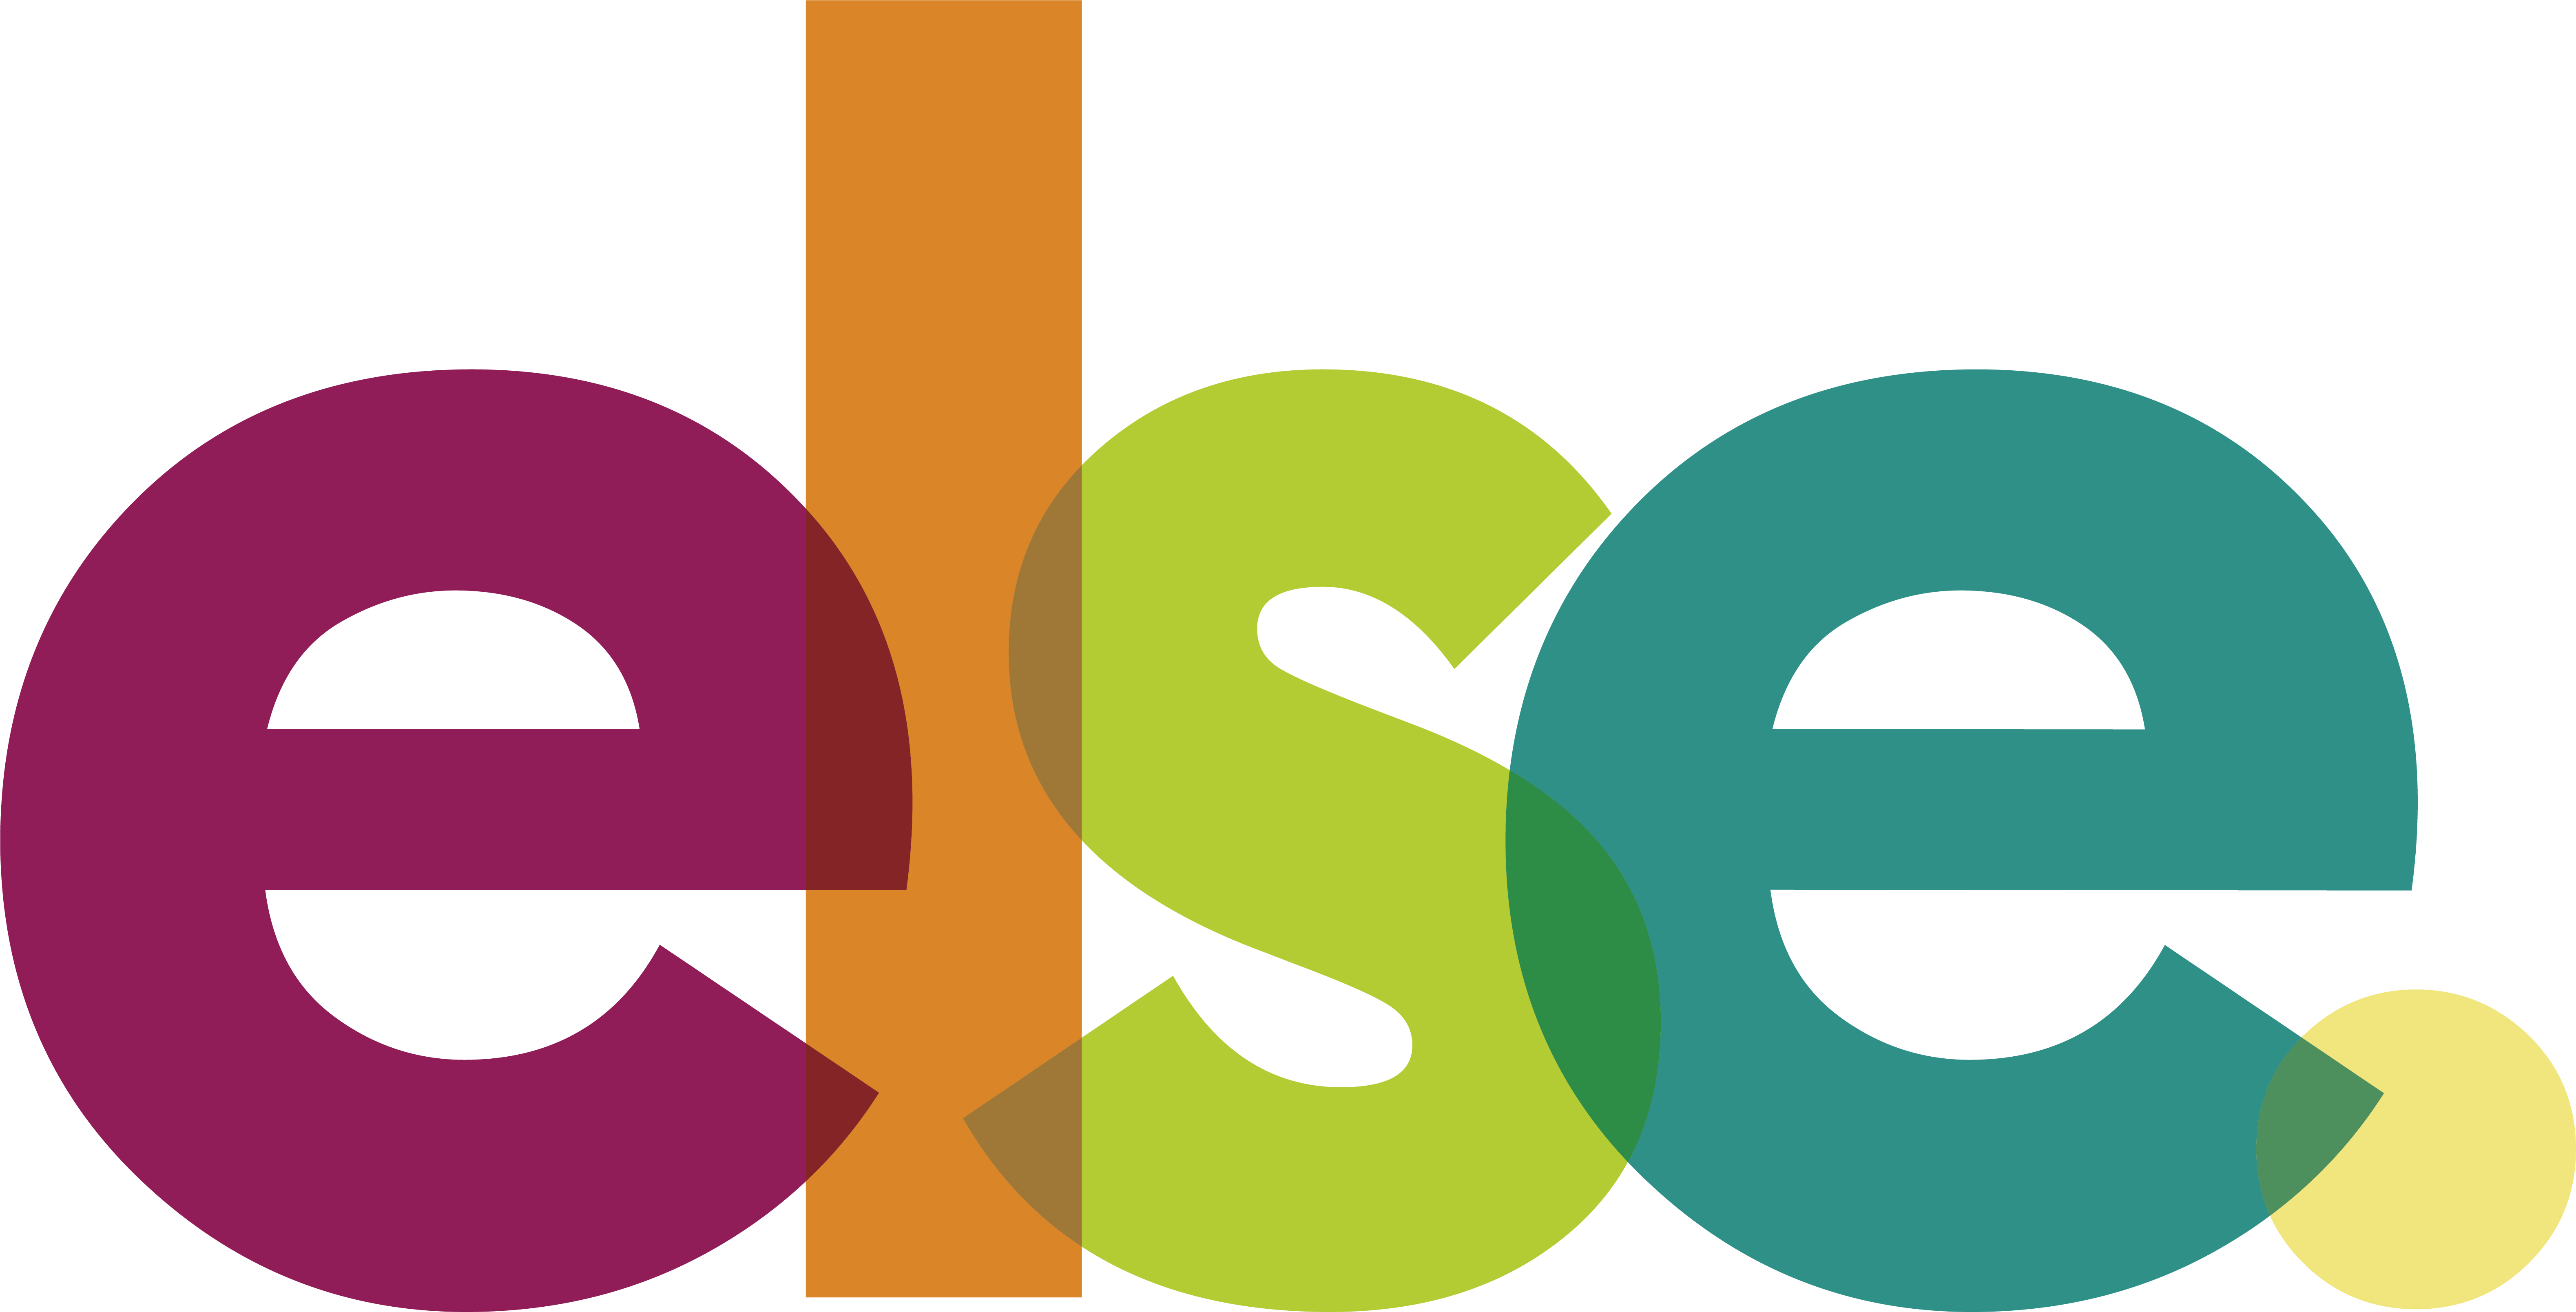 Else Expands to Canada’s Second Largest Retailer with Its Product Range in Over 600 Stores